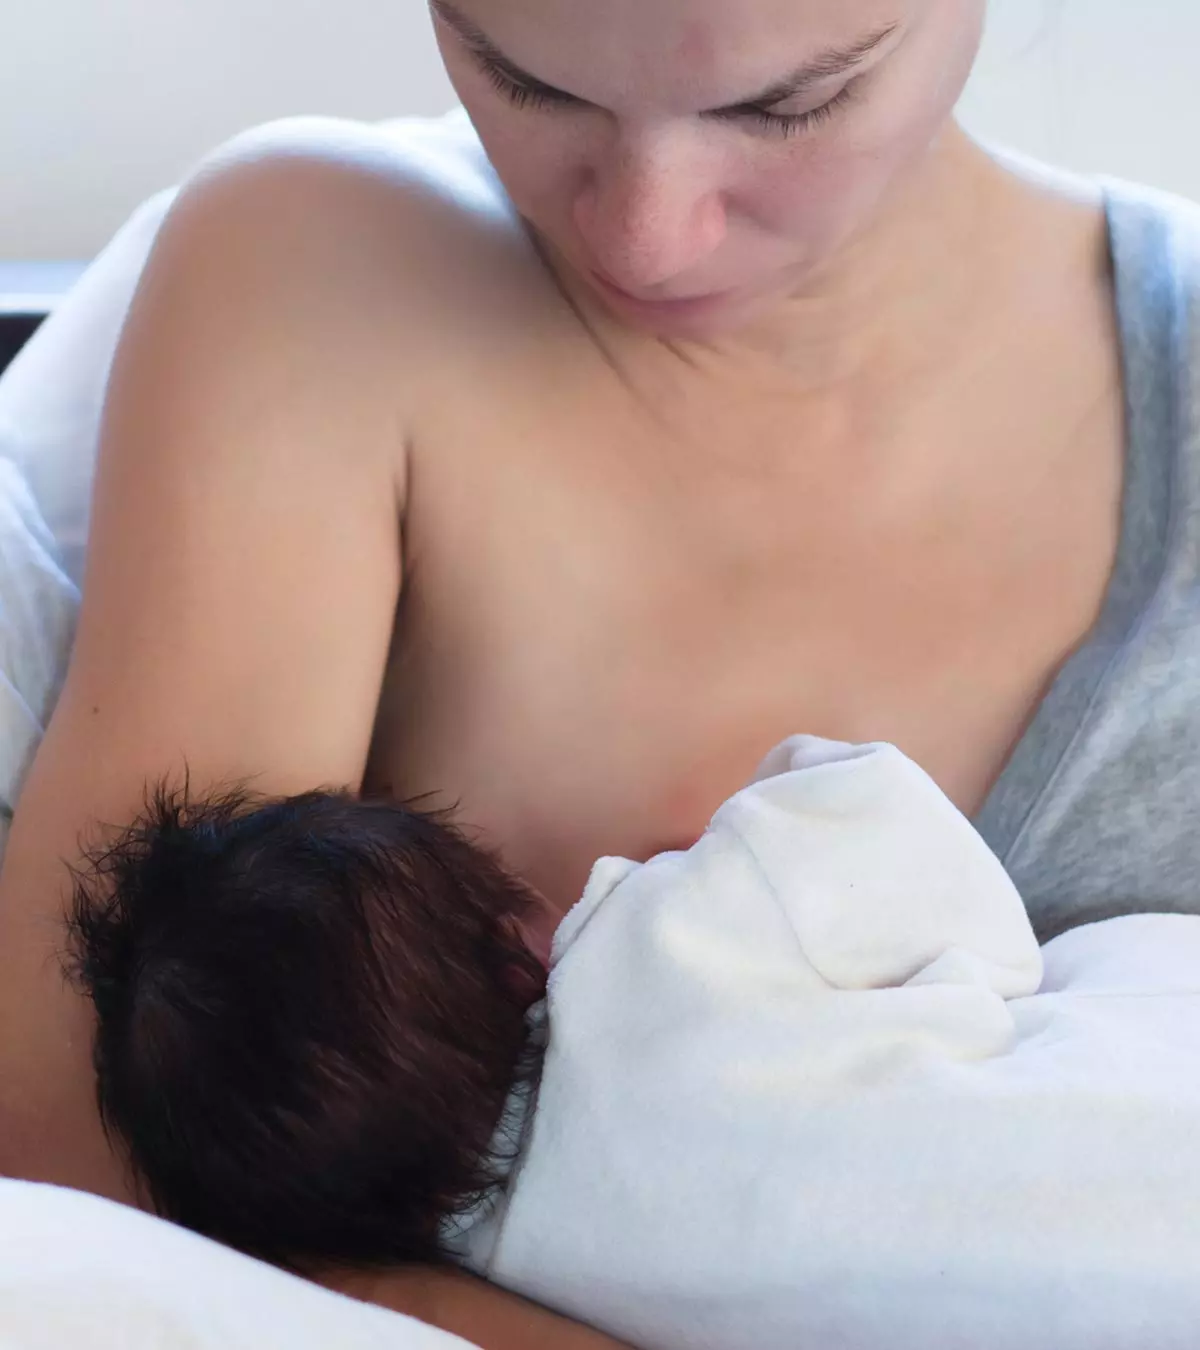 Tips To Make Fasting Easier While Breastfeeding